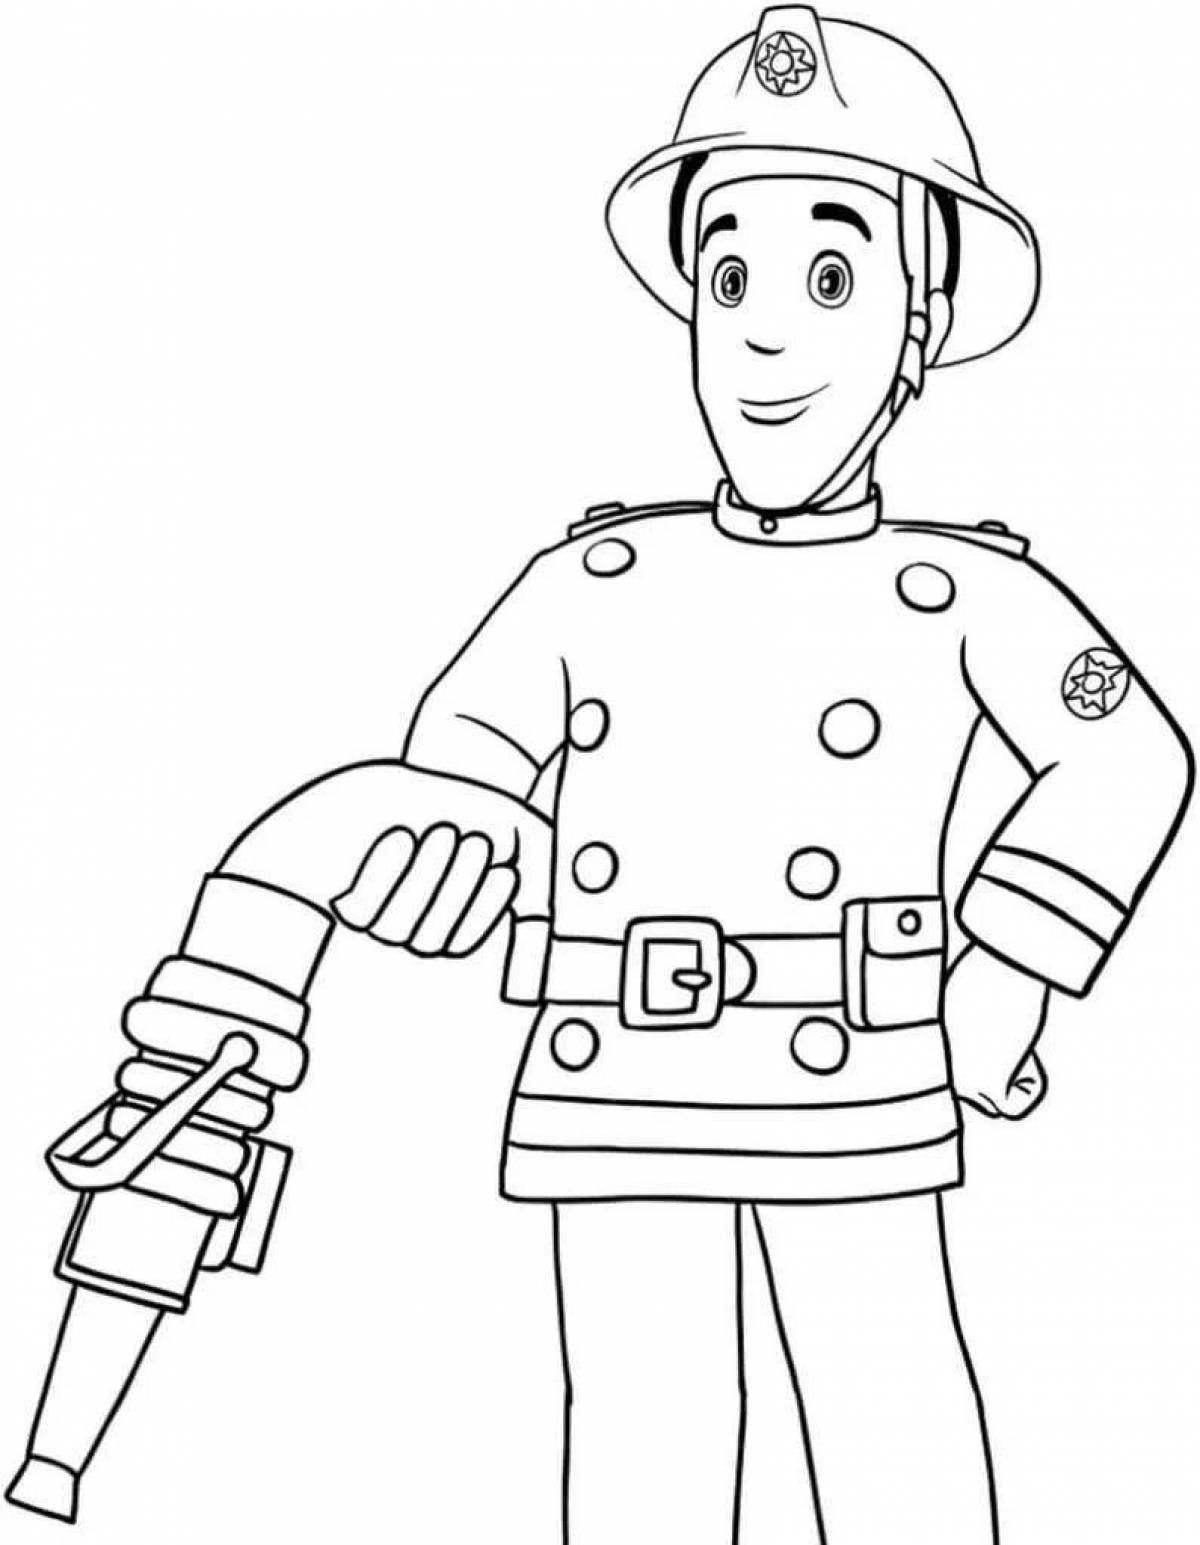 Exquisite fireman drawing